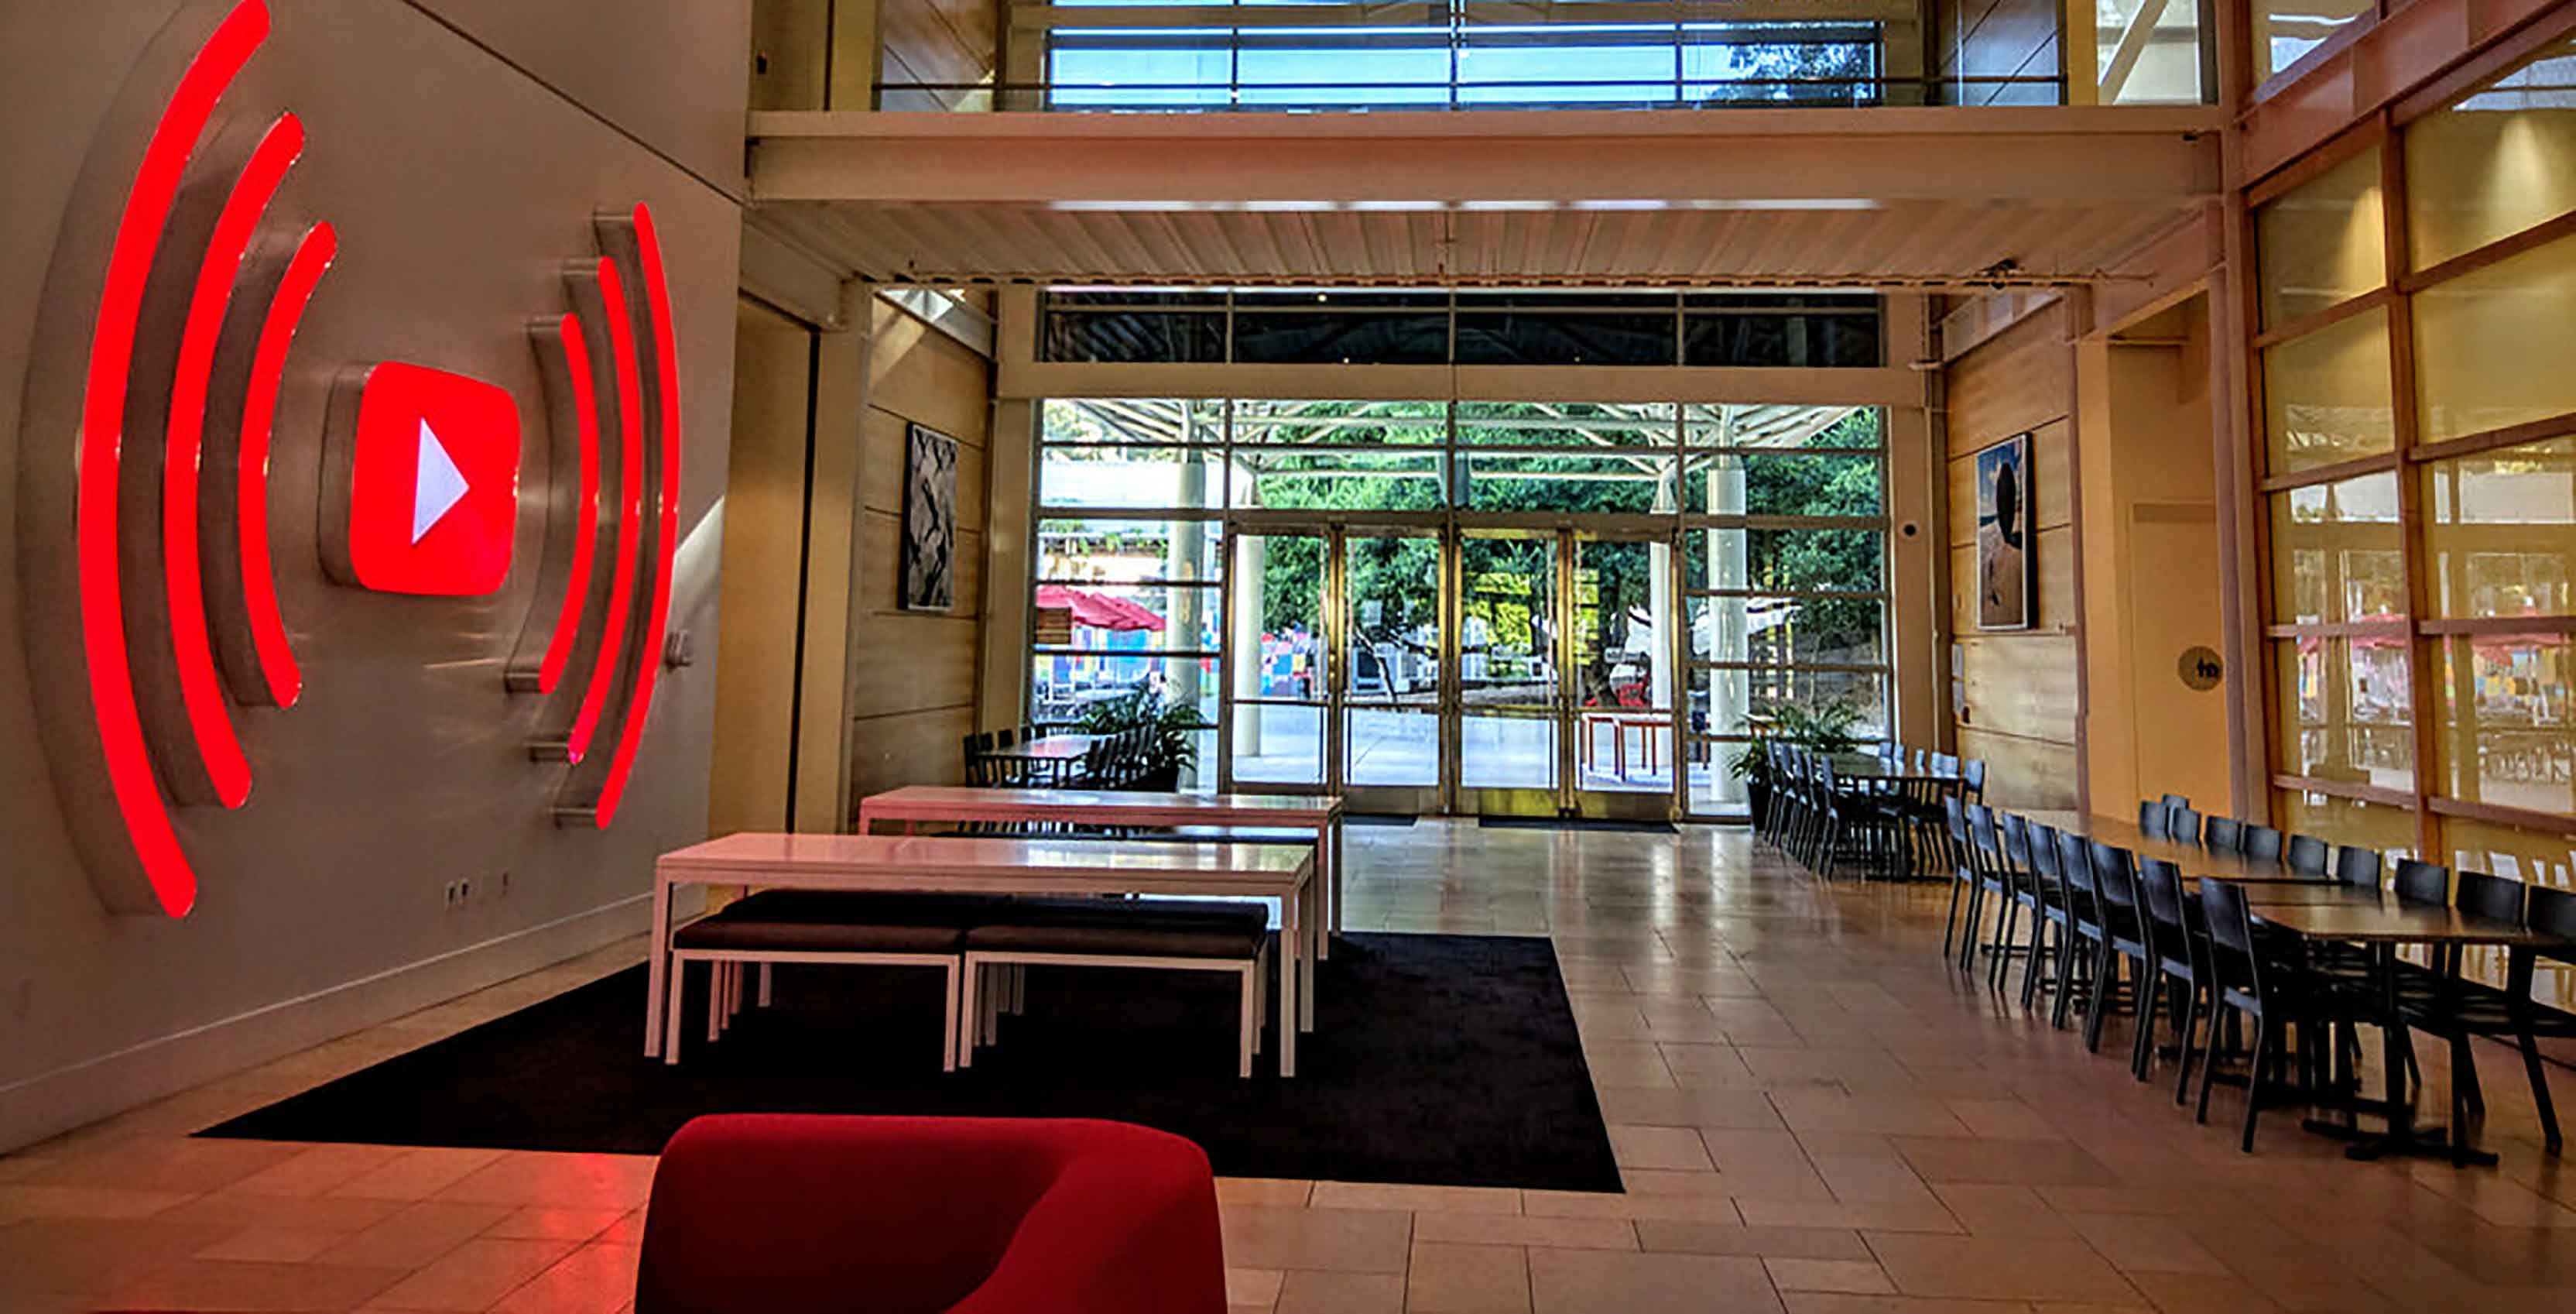 YouTube HQ with logo